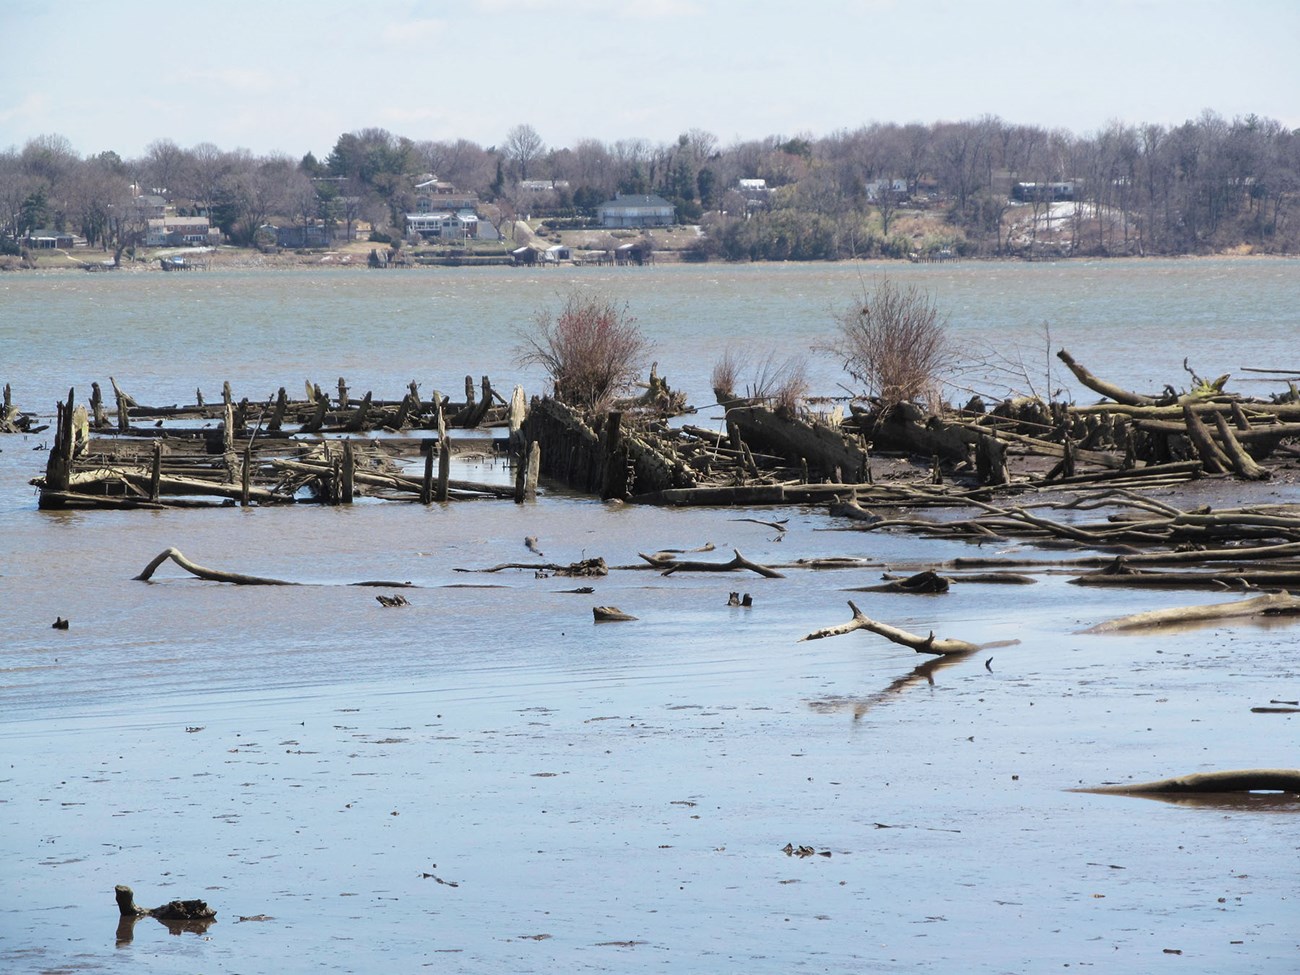 The remnant dyke structures at Dyke Marsh Wildlife Preserve, George Washington Memorial Parkway in Virginia are significant cultural resources threatened by water level rises and increased storm events.